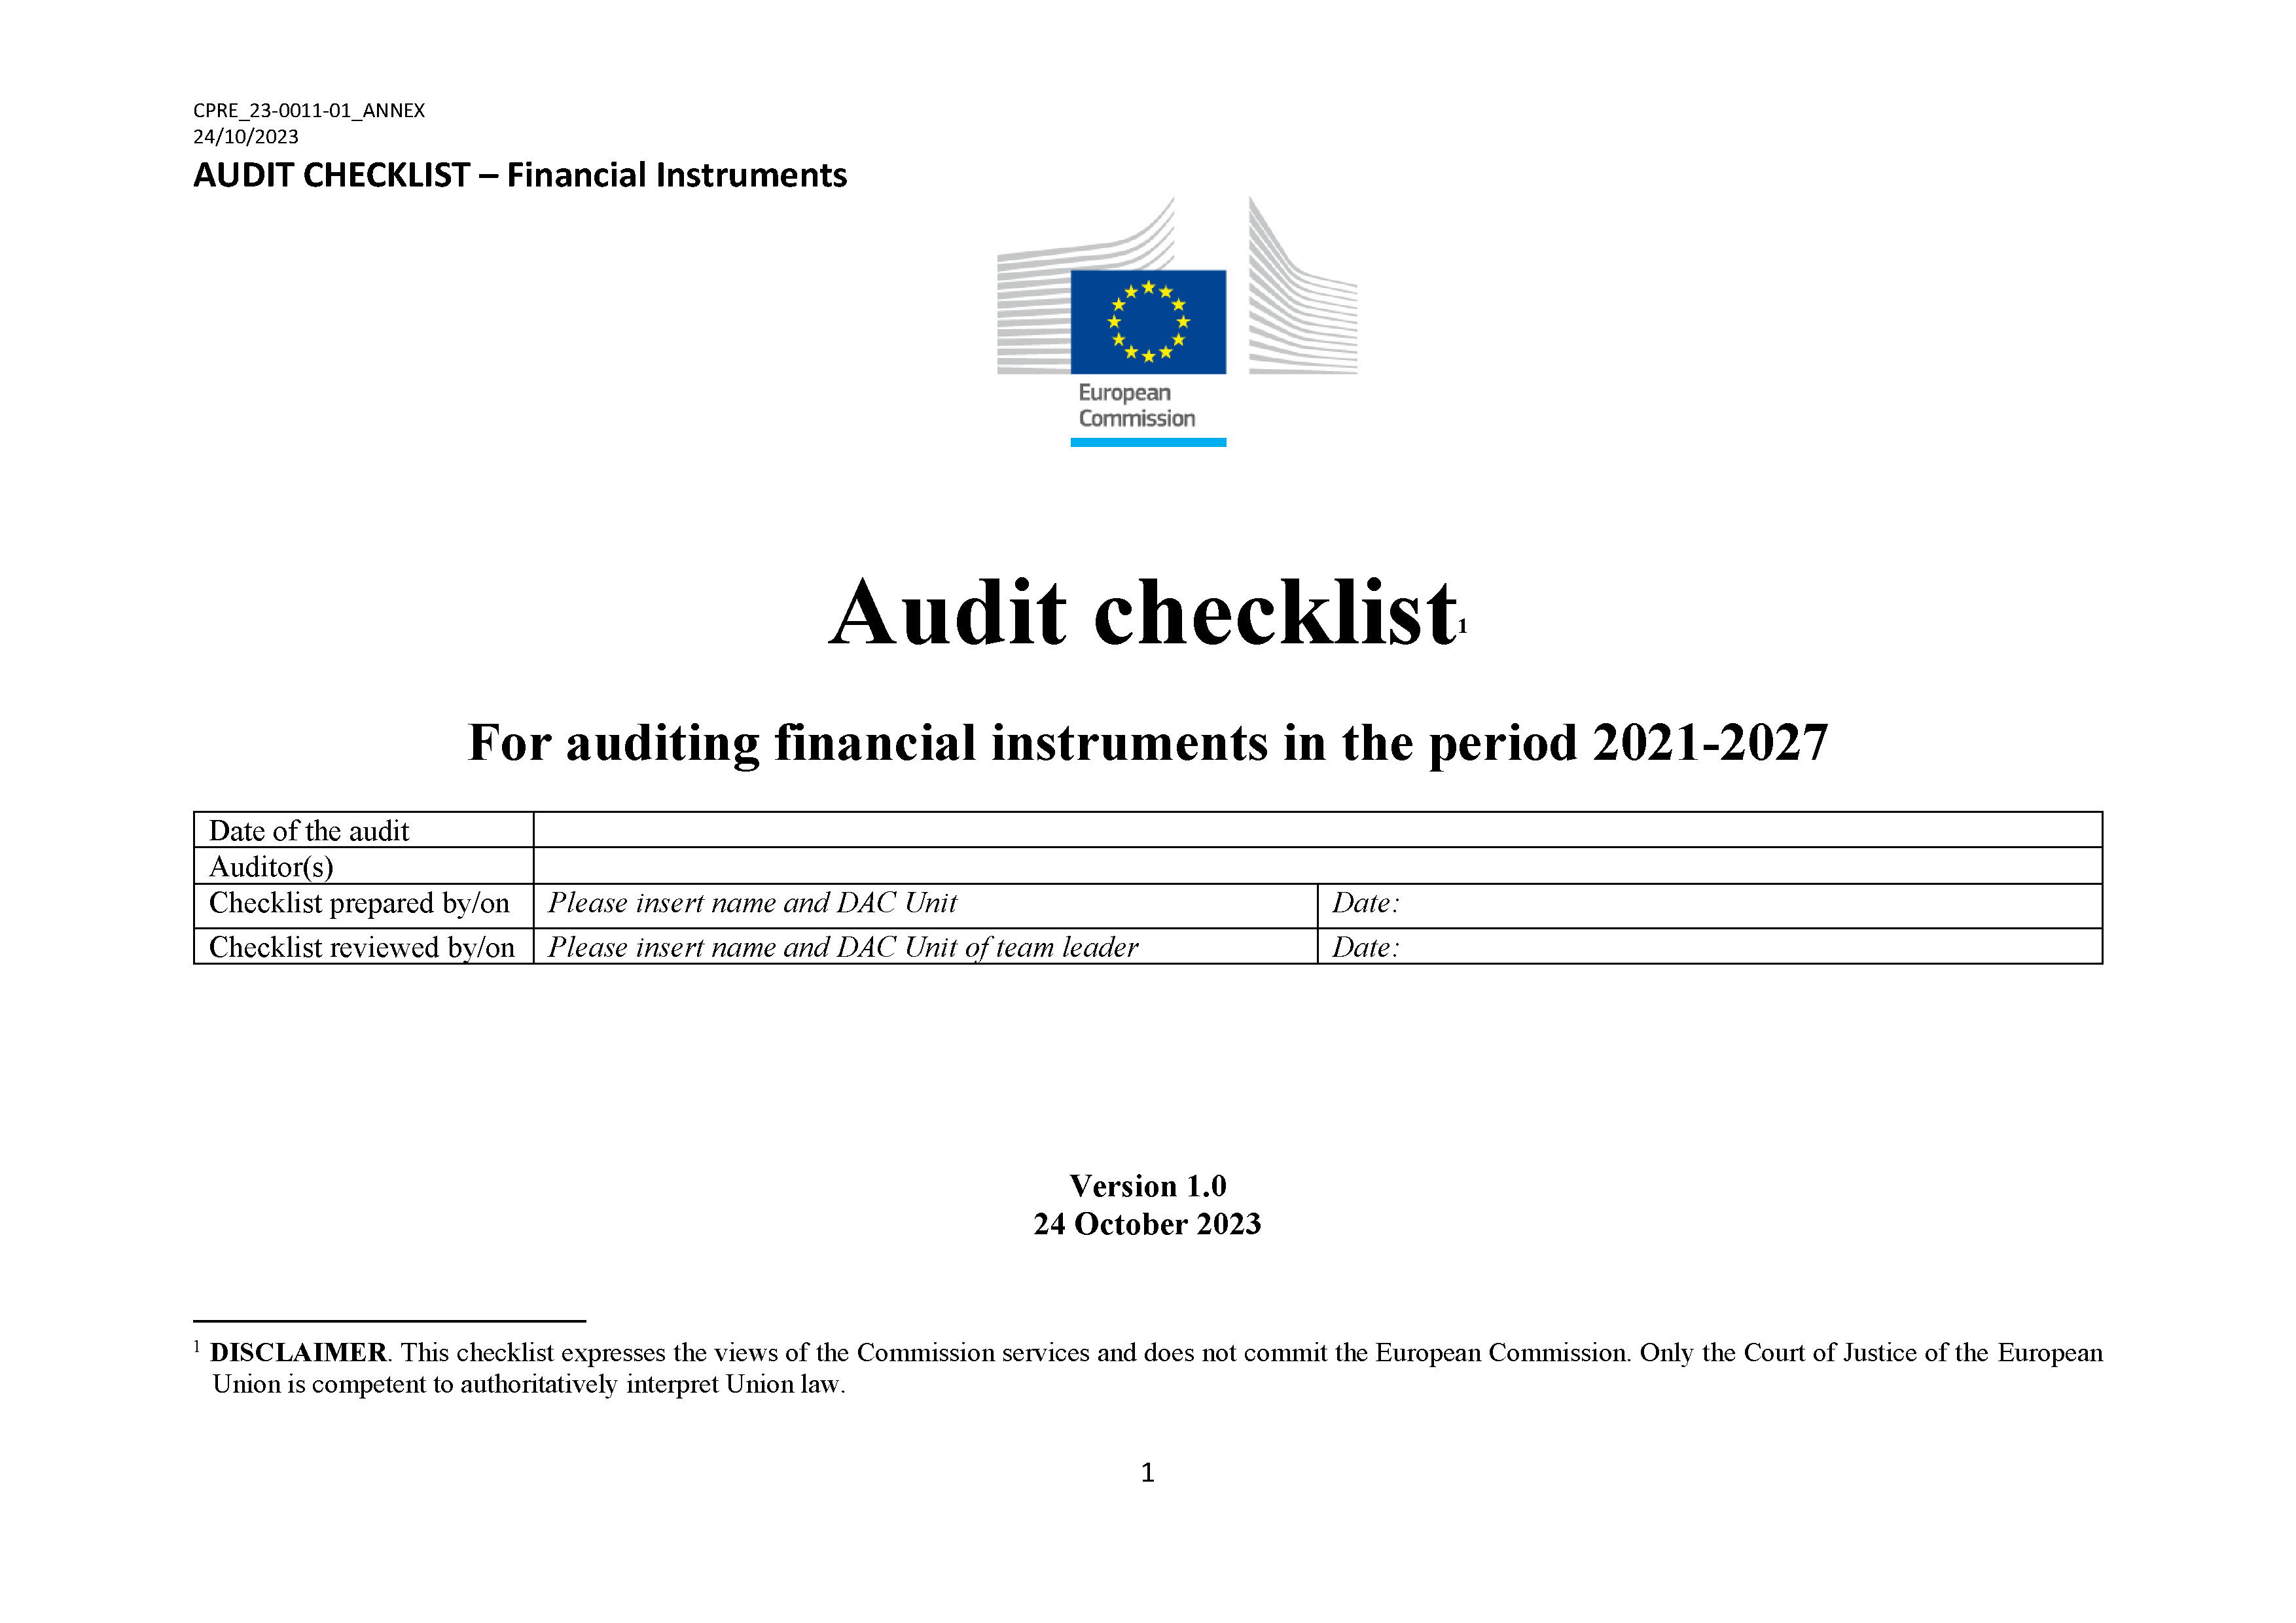 Audit methodology for auditing financial instruments, programming period 2021-2027